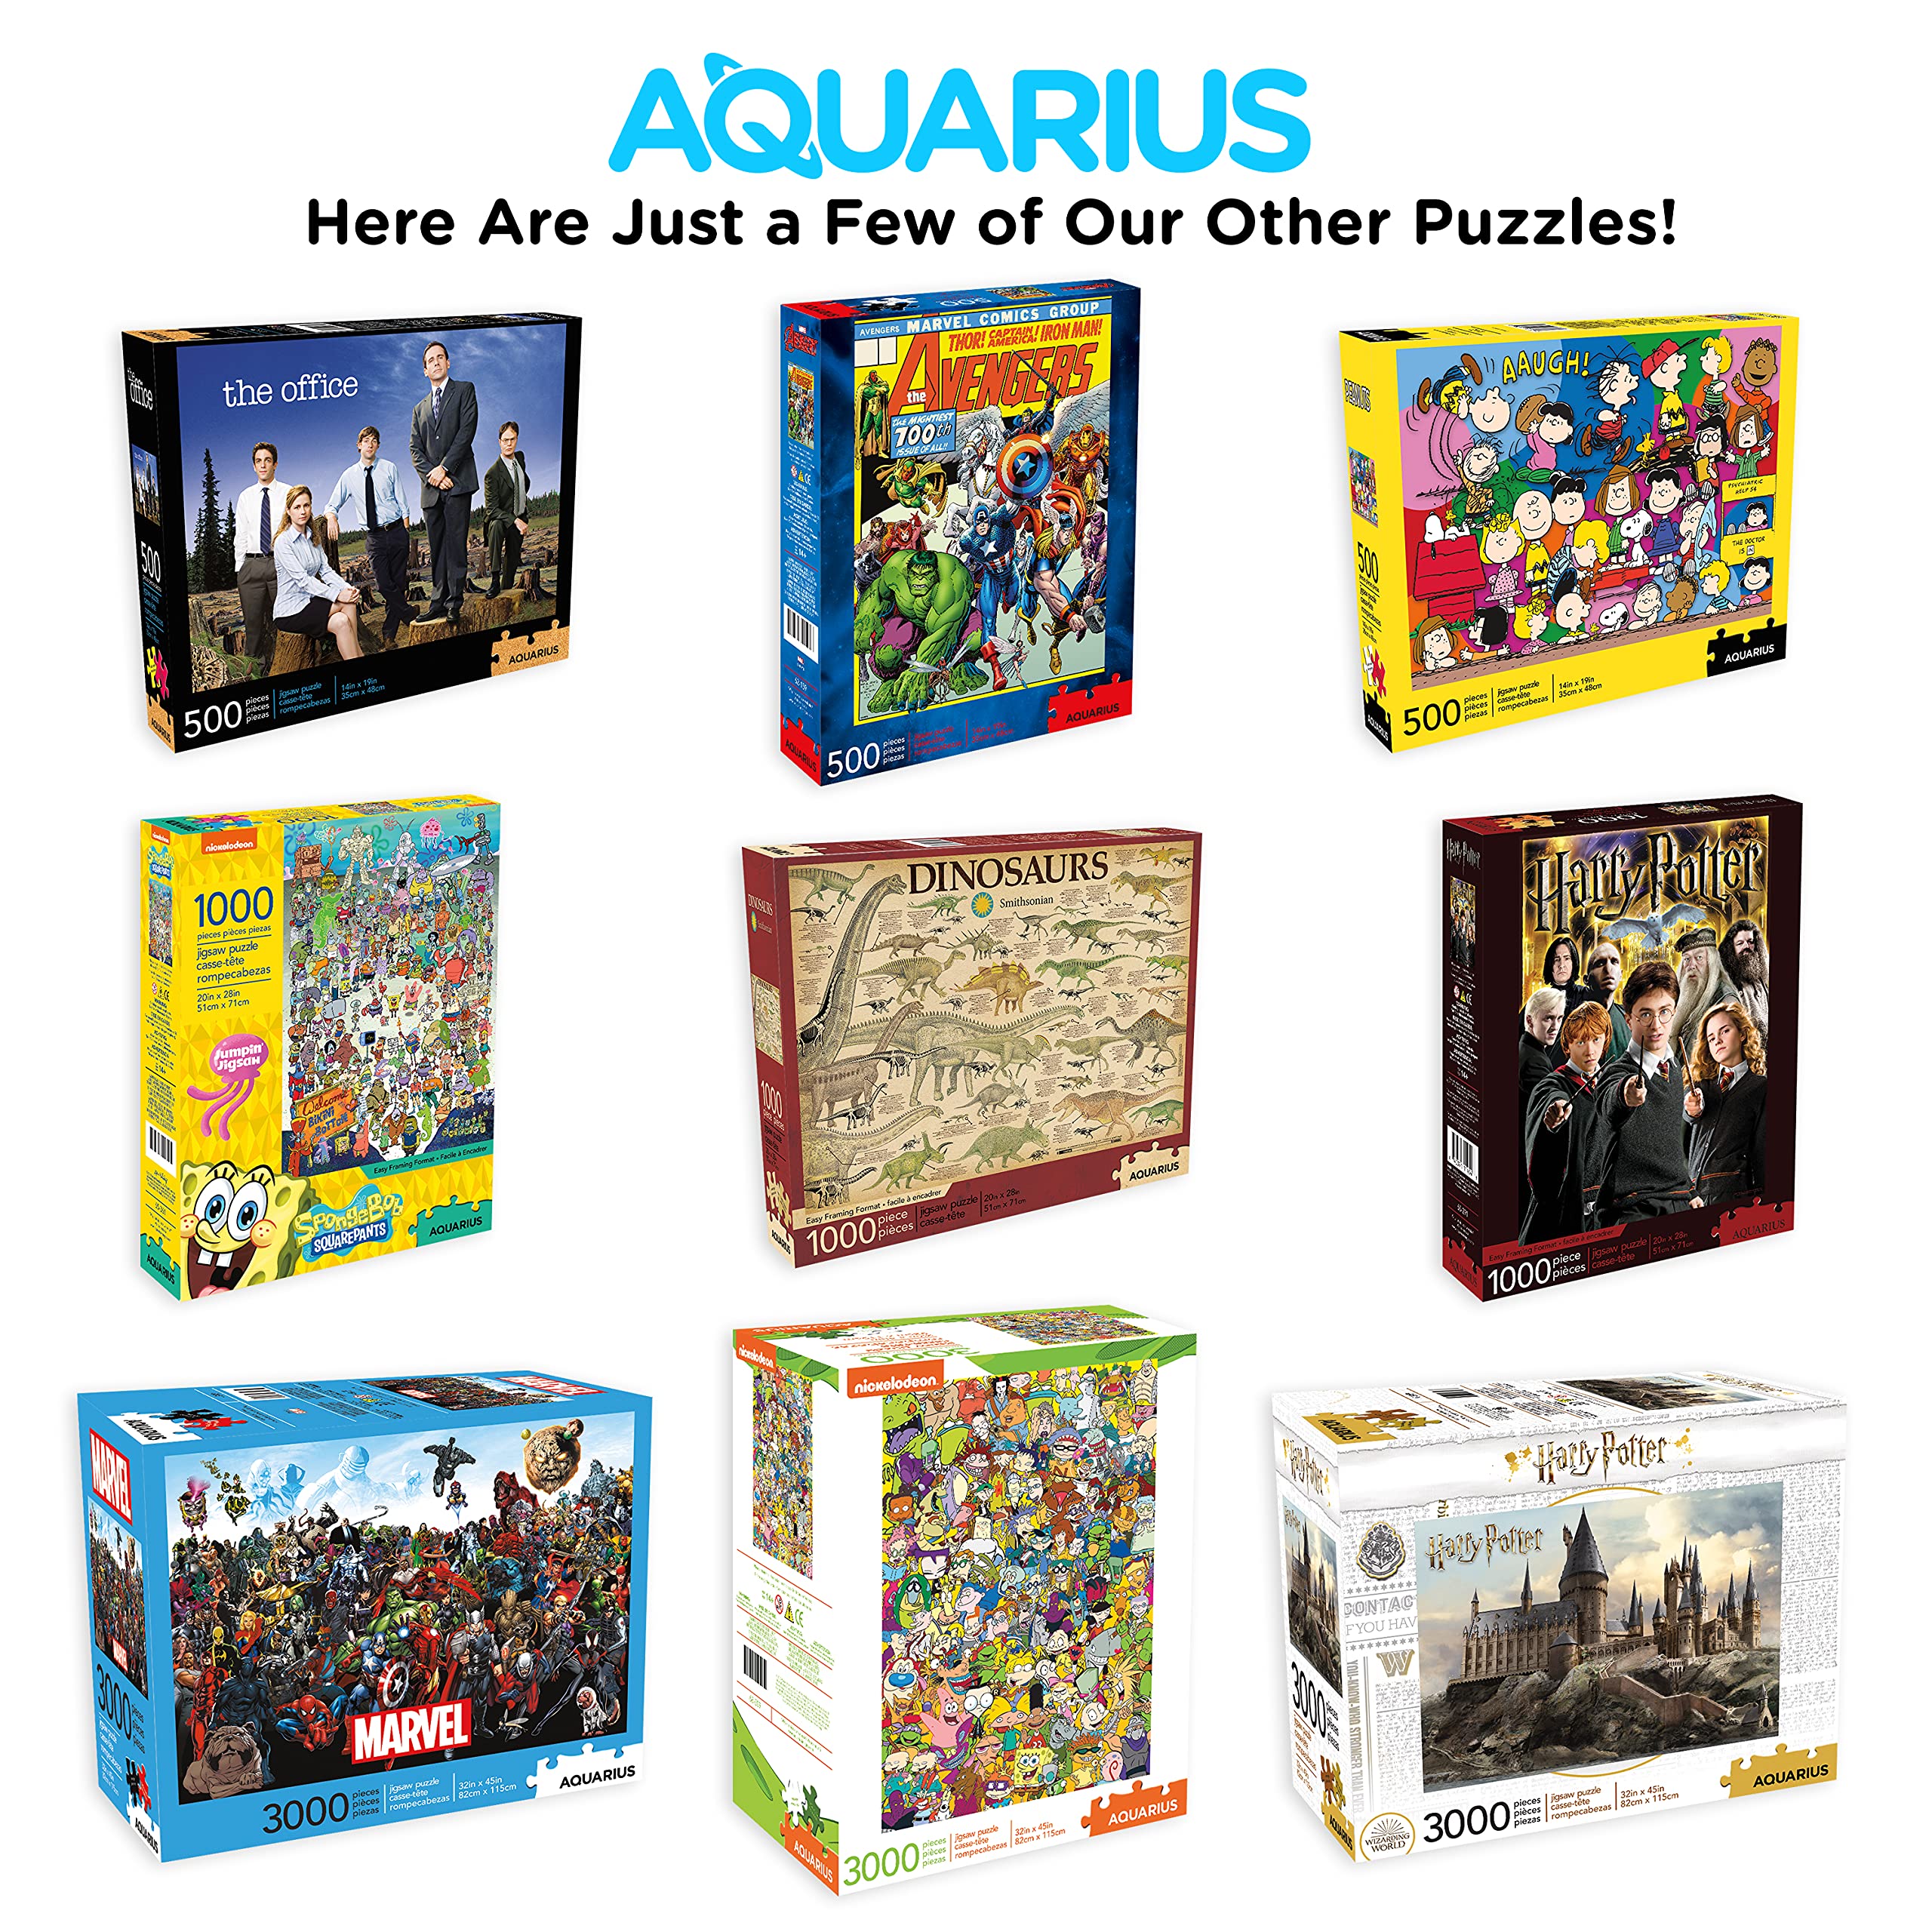 Aquarius Friends Puzzle (3000 Piece Jigsaw Puzzle) - Officially Licensed Friends TV Show Merchandise & Collectibles - Glare Free - Precision Fit - 32 x 45 Inches